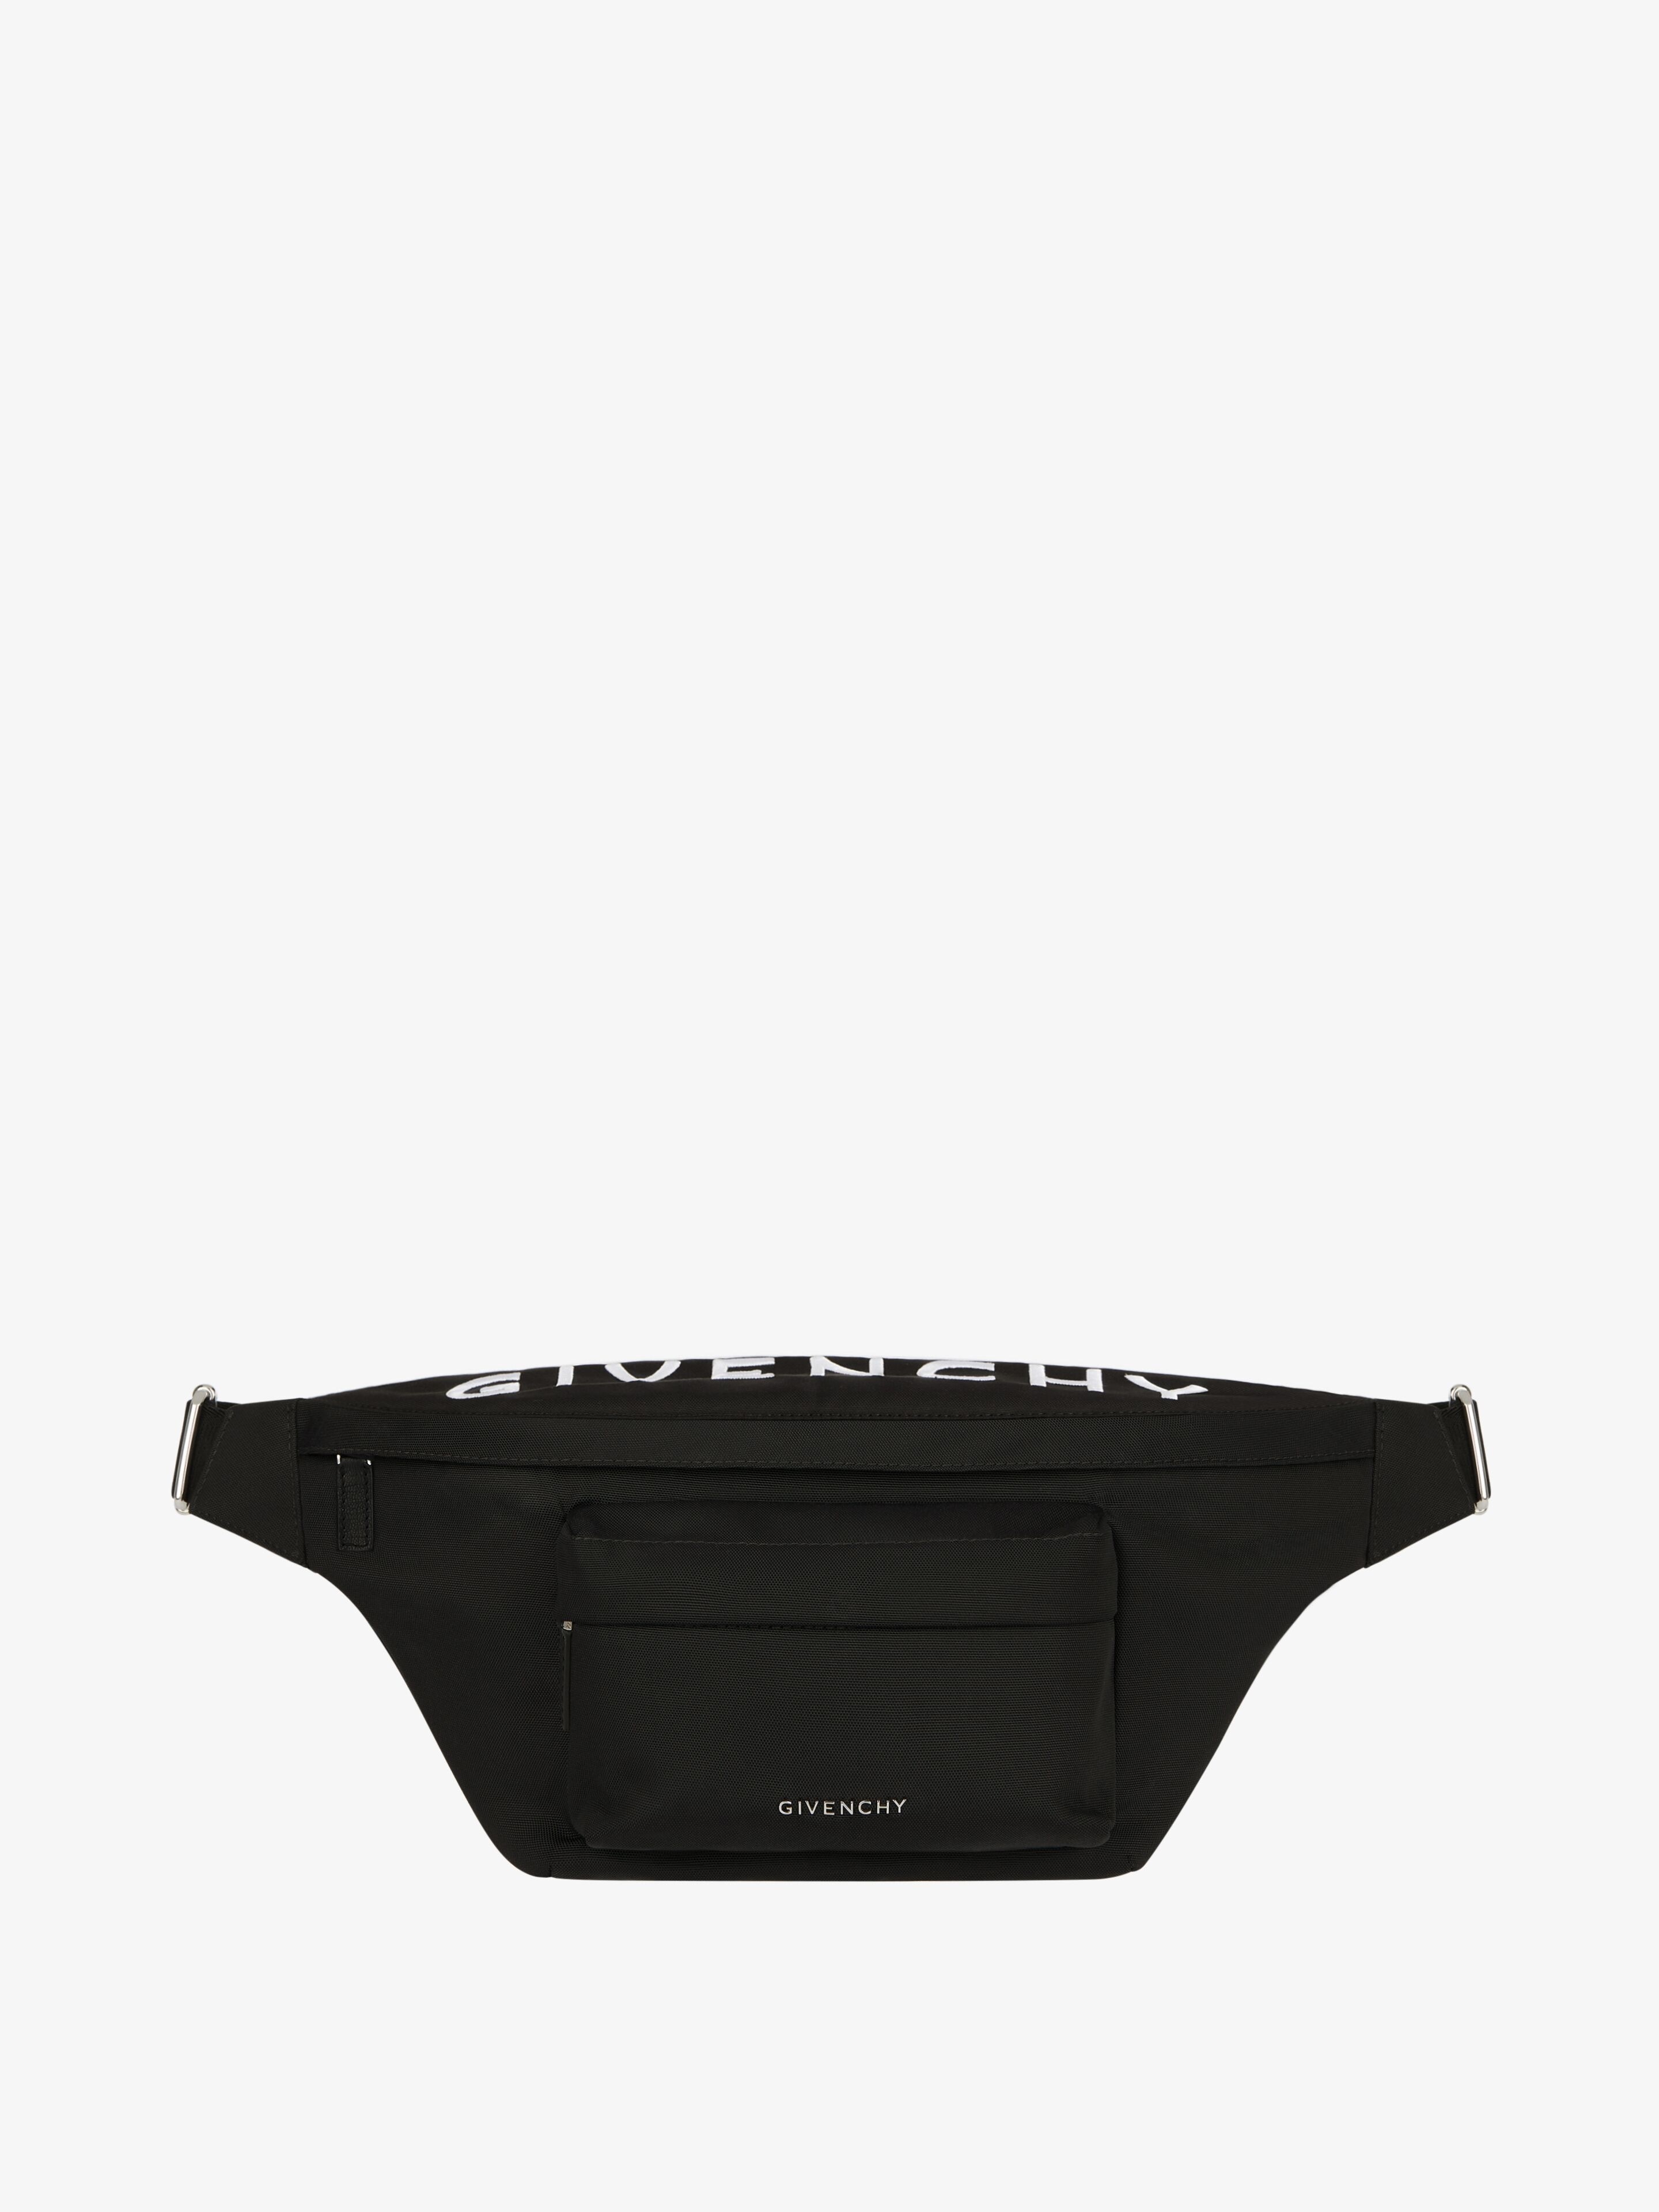 ESSENTIAL U BUMBAG IN NYLON WITH GIVENCHY EMBROIDERY - 1